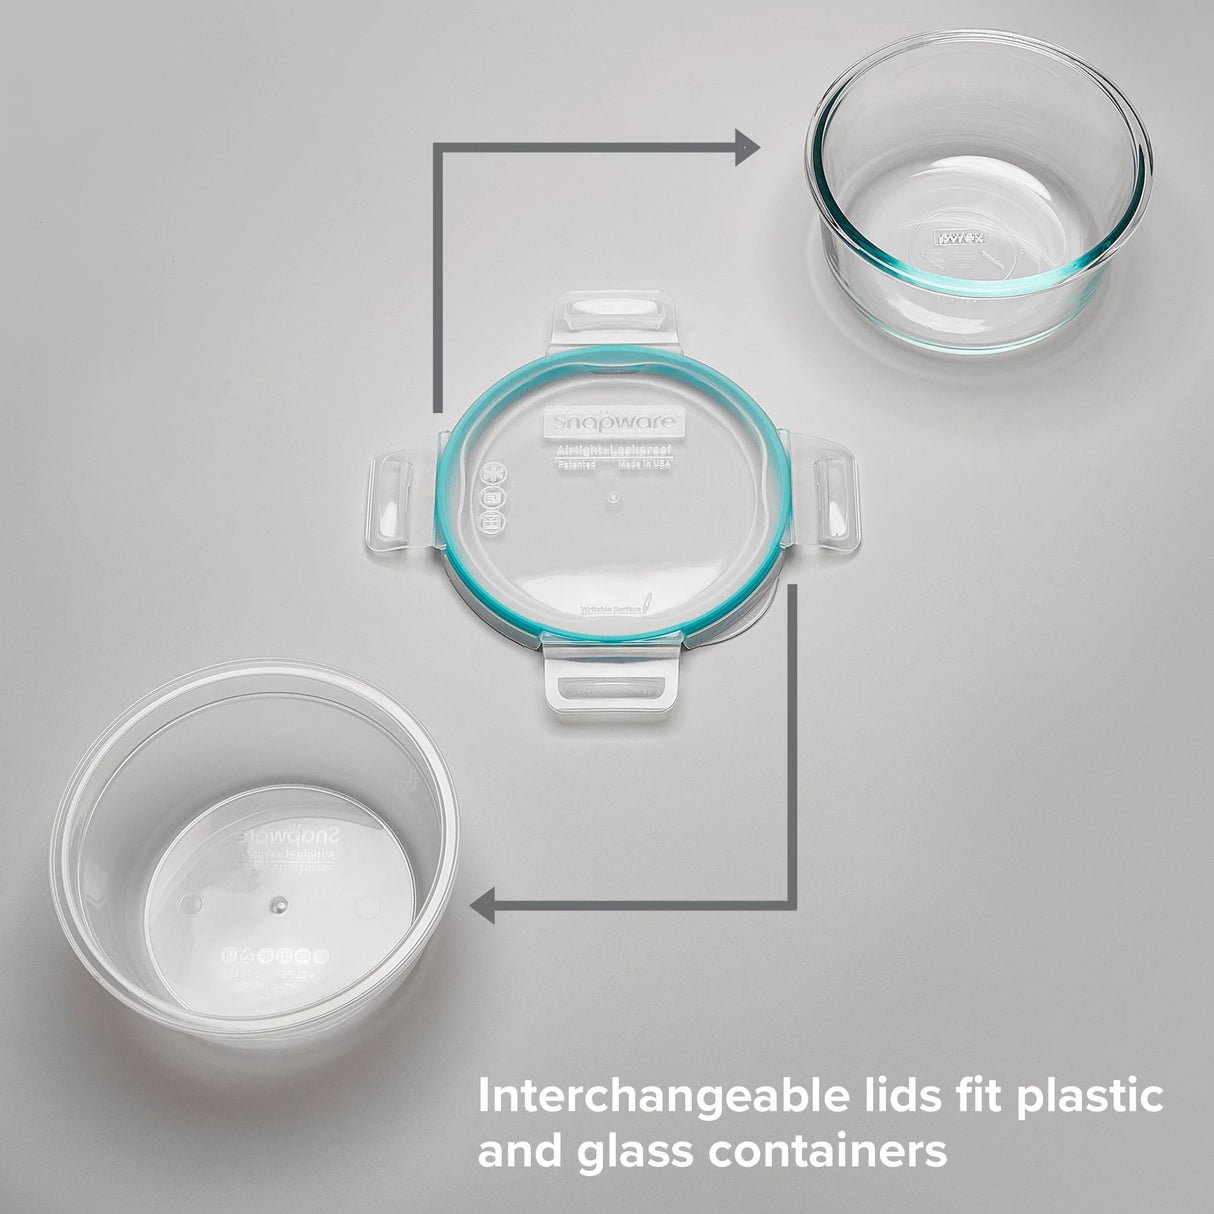  Total Solution round bowls &amp; lid with text interchangeabe lids fit plastic &amp; glass containers